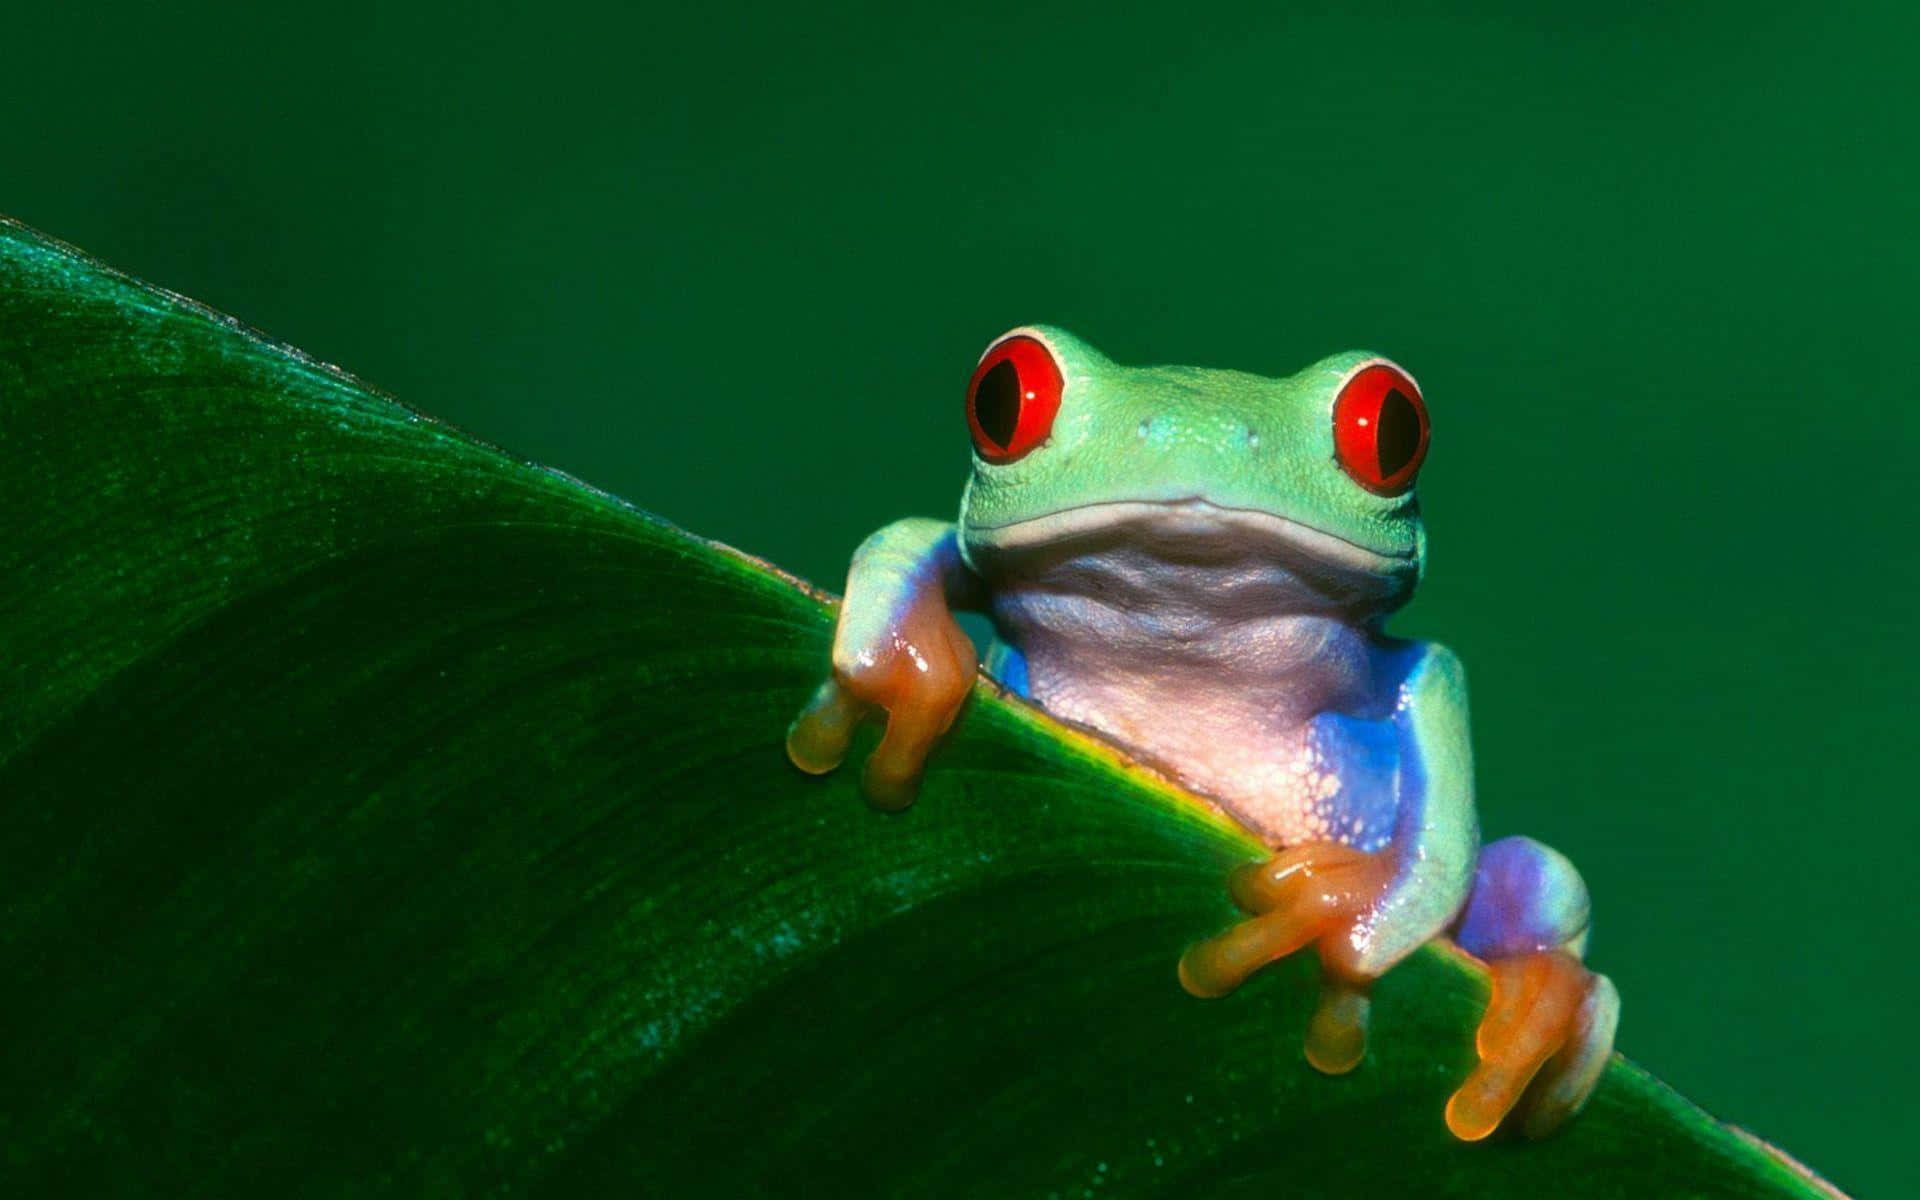 A closeup of a vibrant-green frog resting on a wet leaf